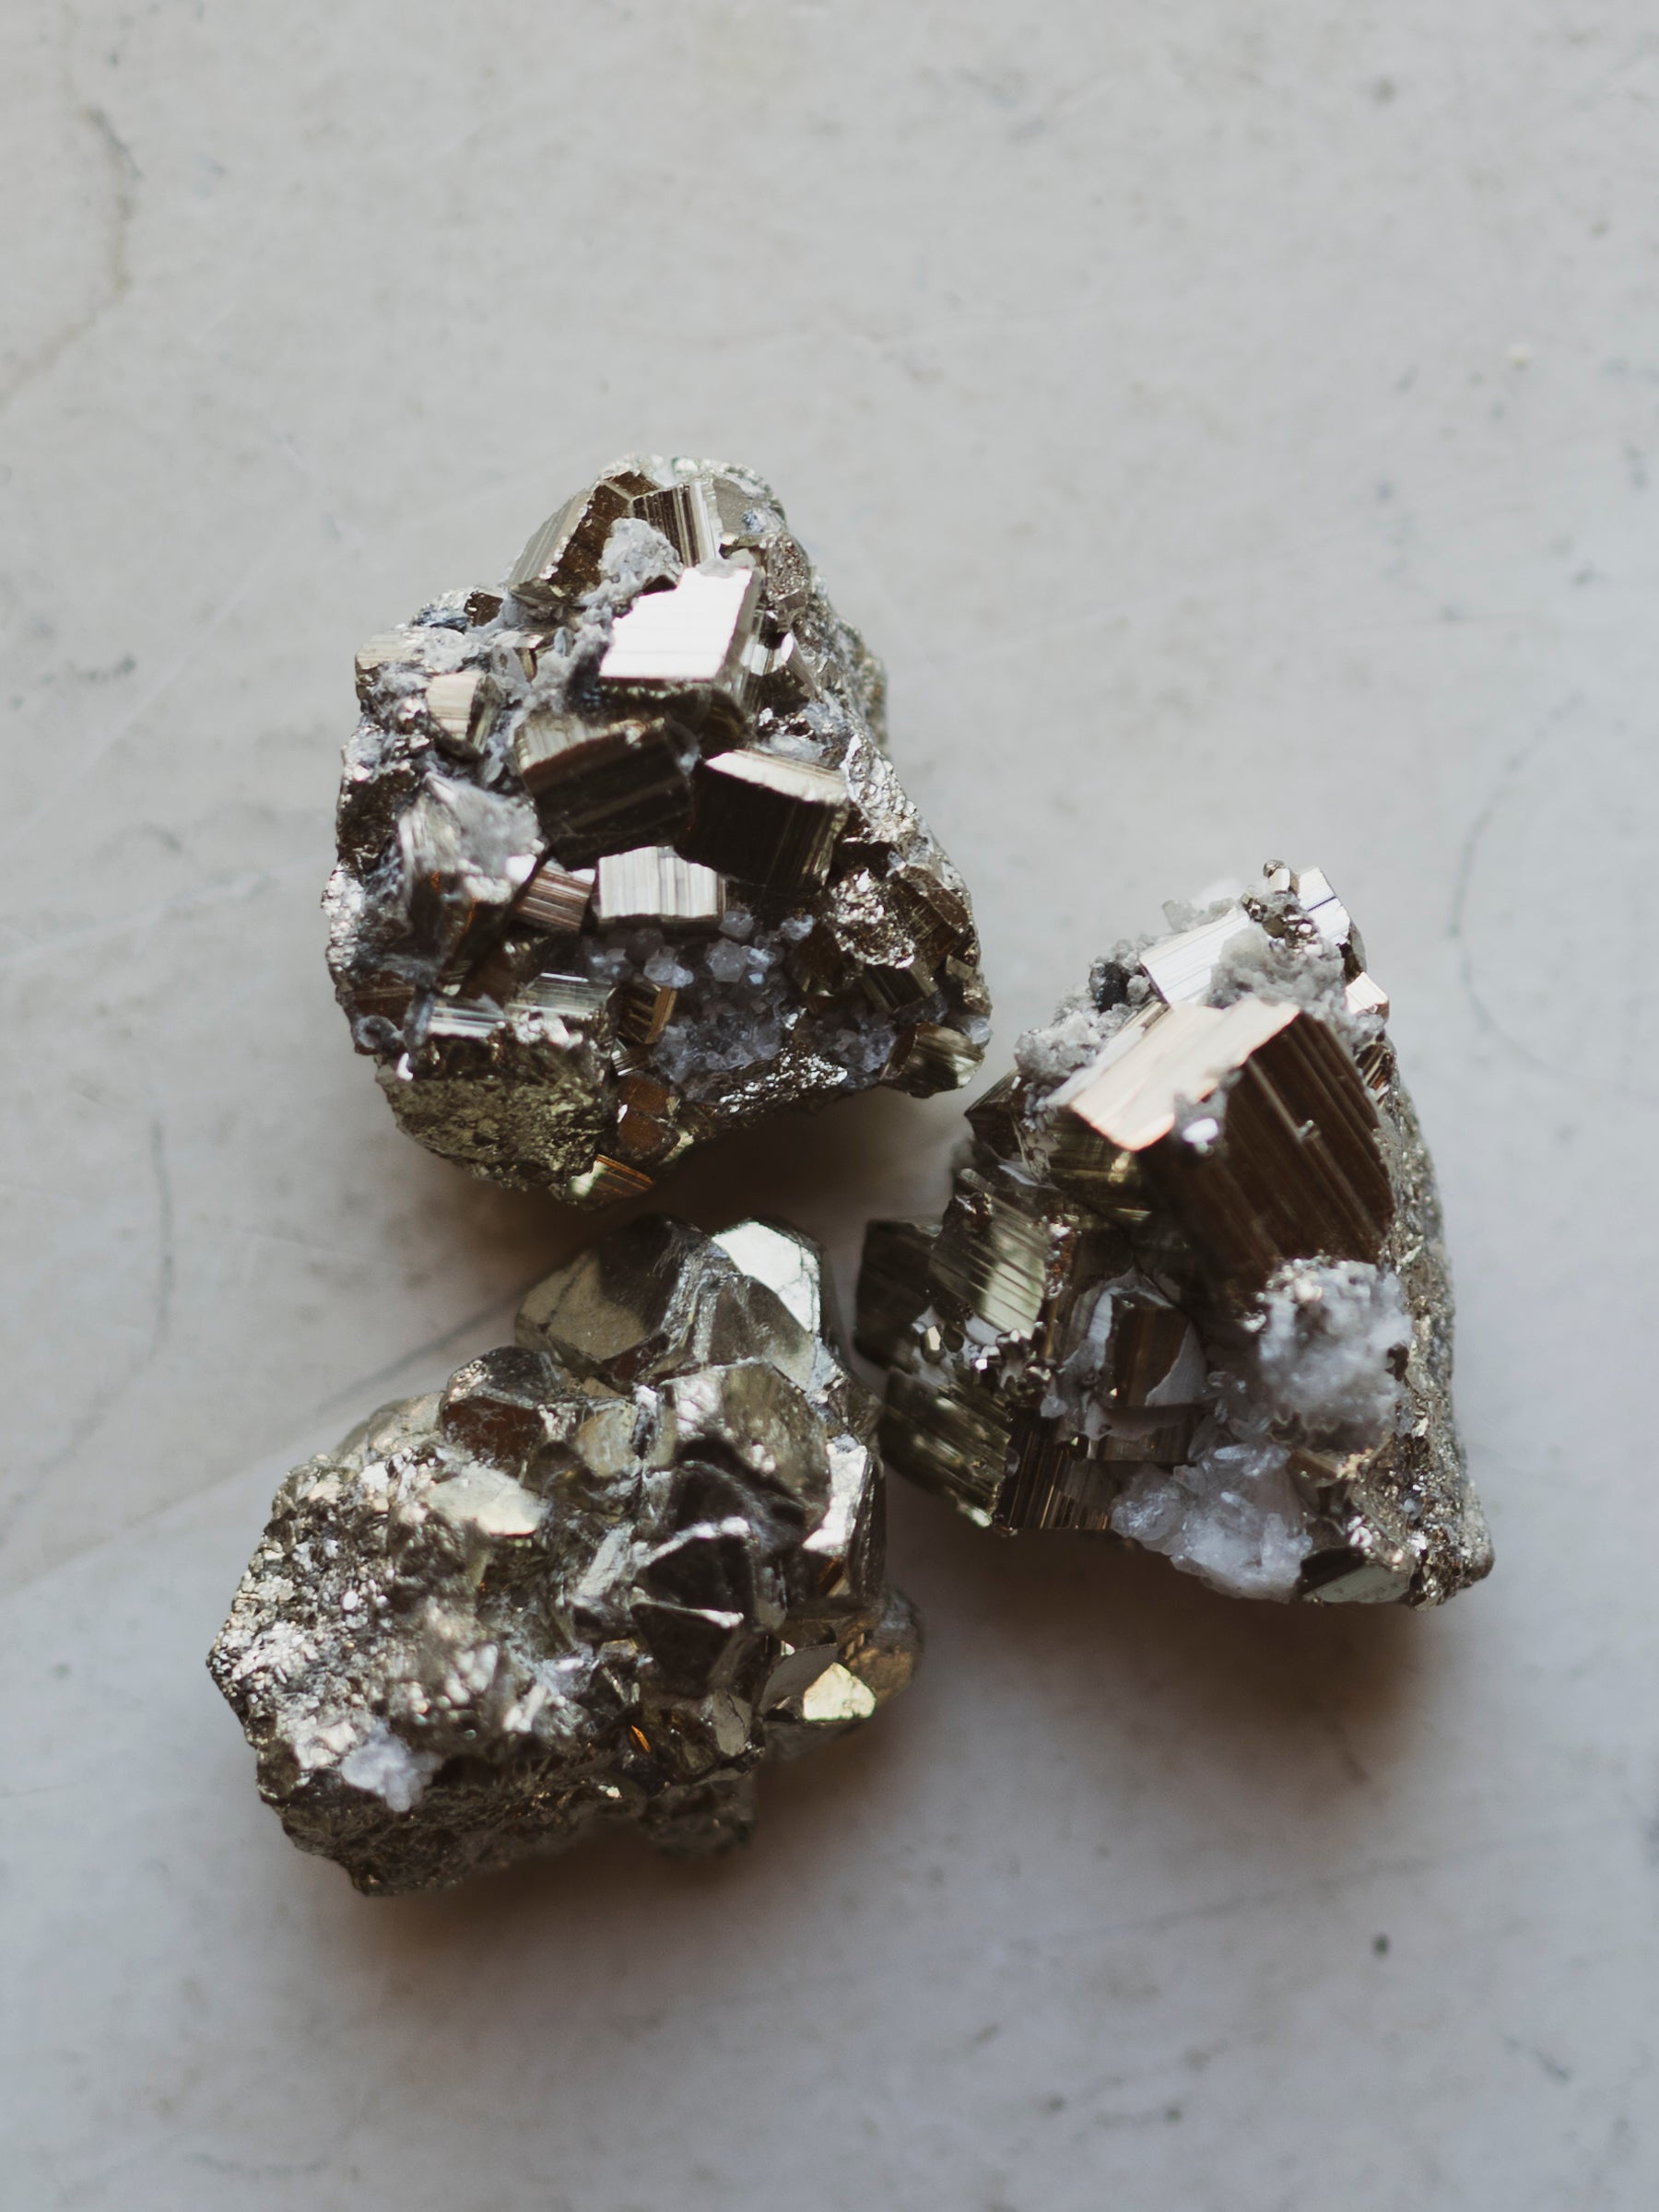 1.5-2" Faceted Iron Pyrite, RM296